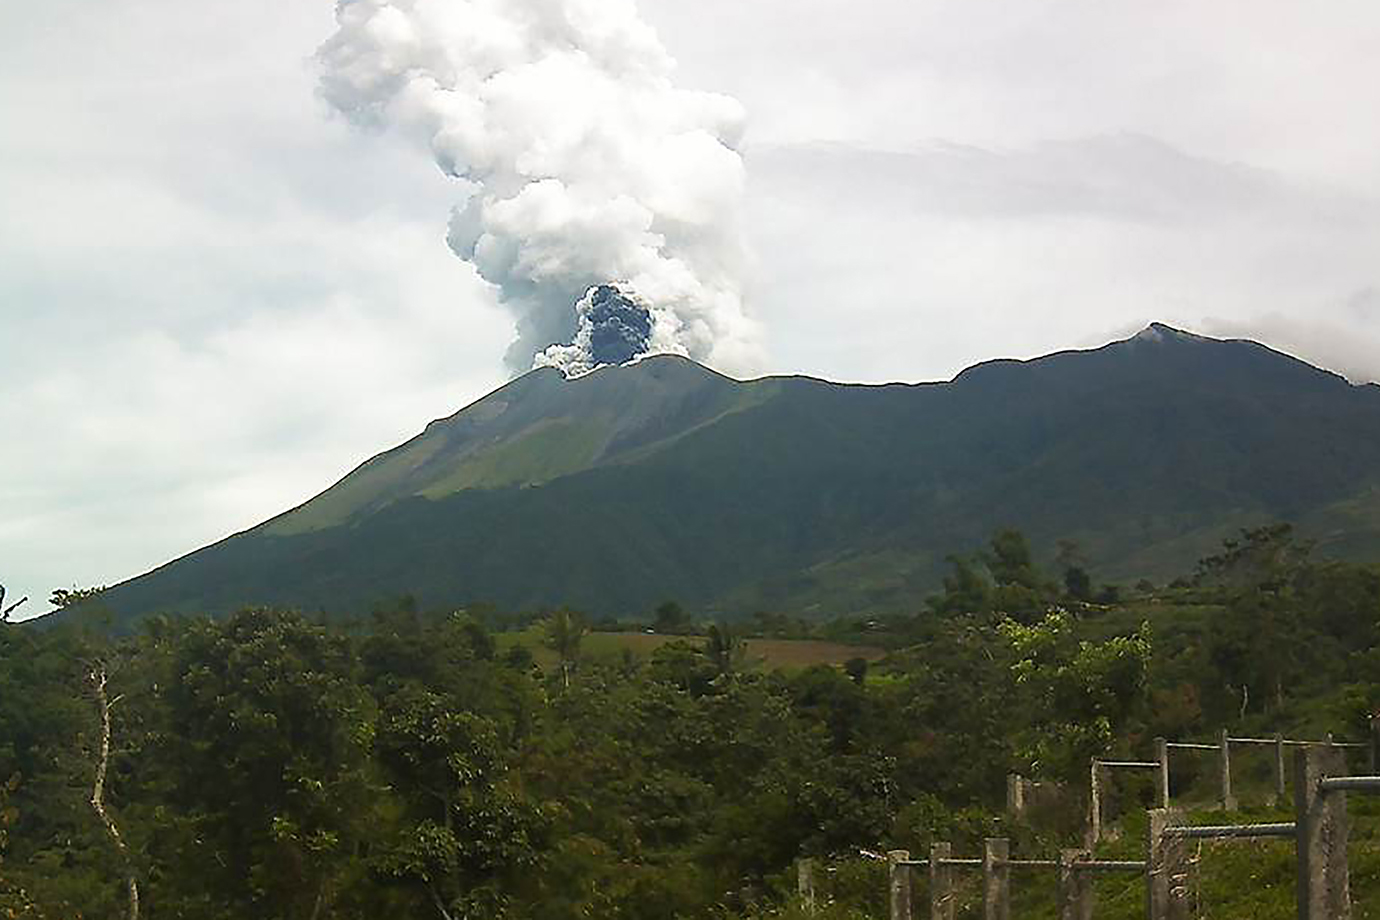 Two volcanoes in the Philippines under close watch for activity